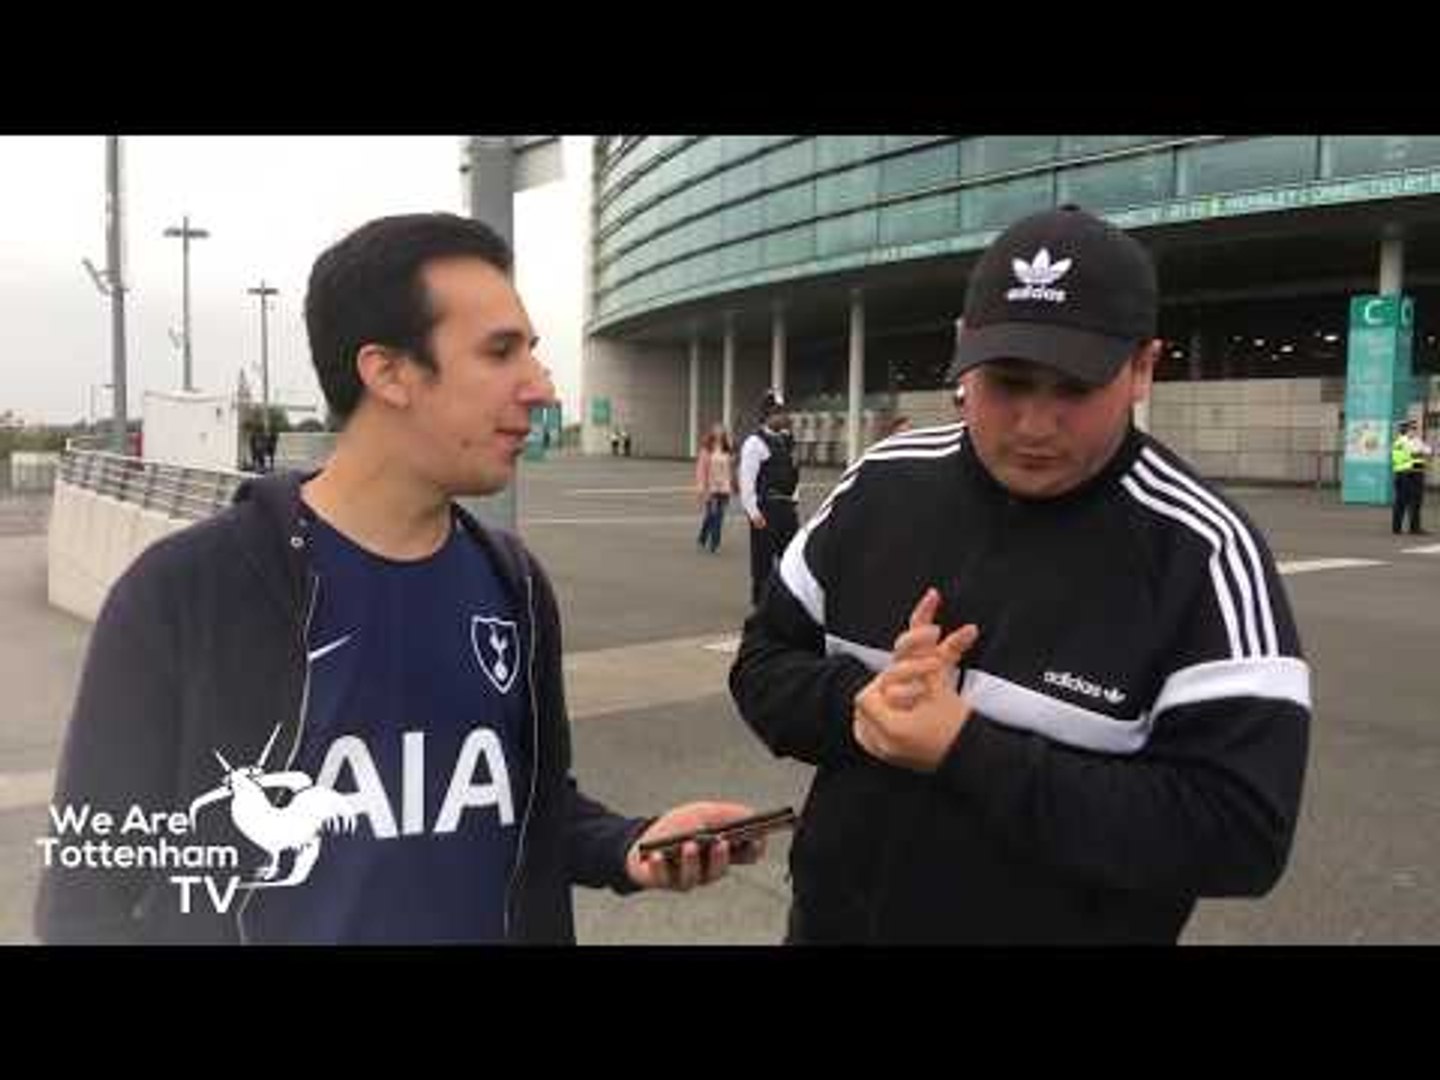 Tottenham 1 Chelsea 2 Post Match Review Featuring 100% Chelsea